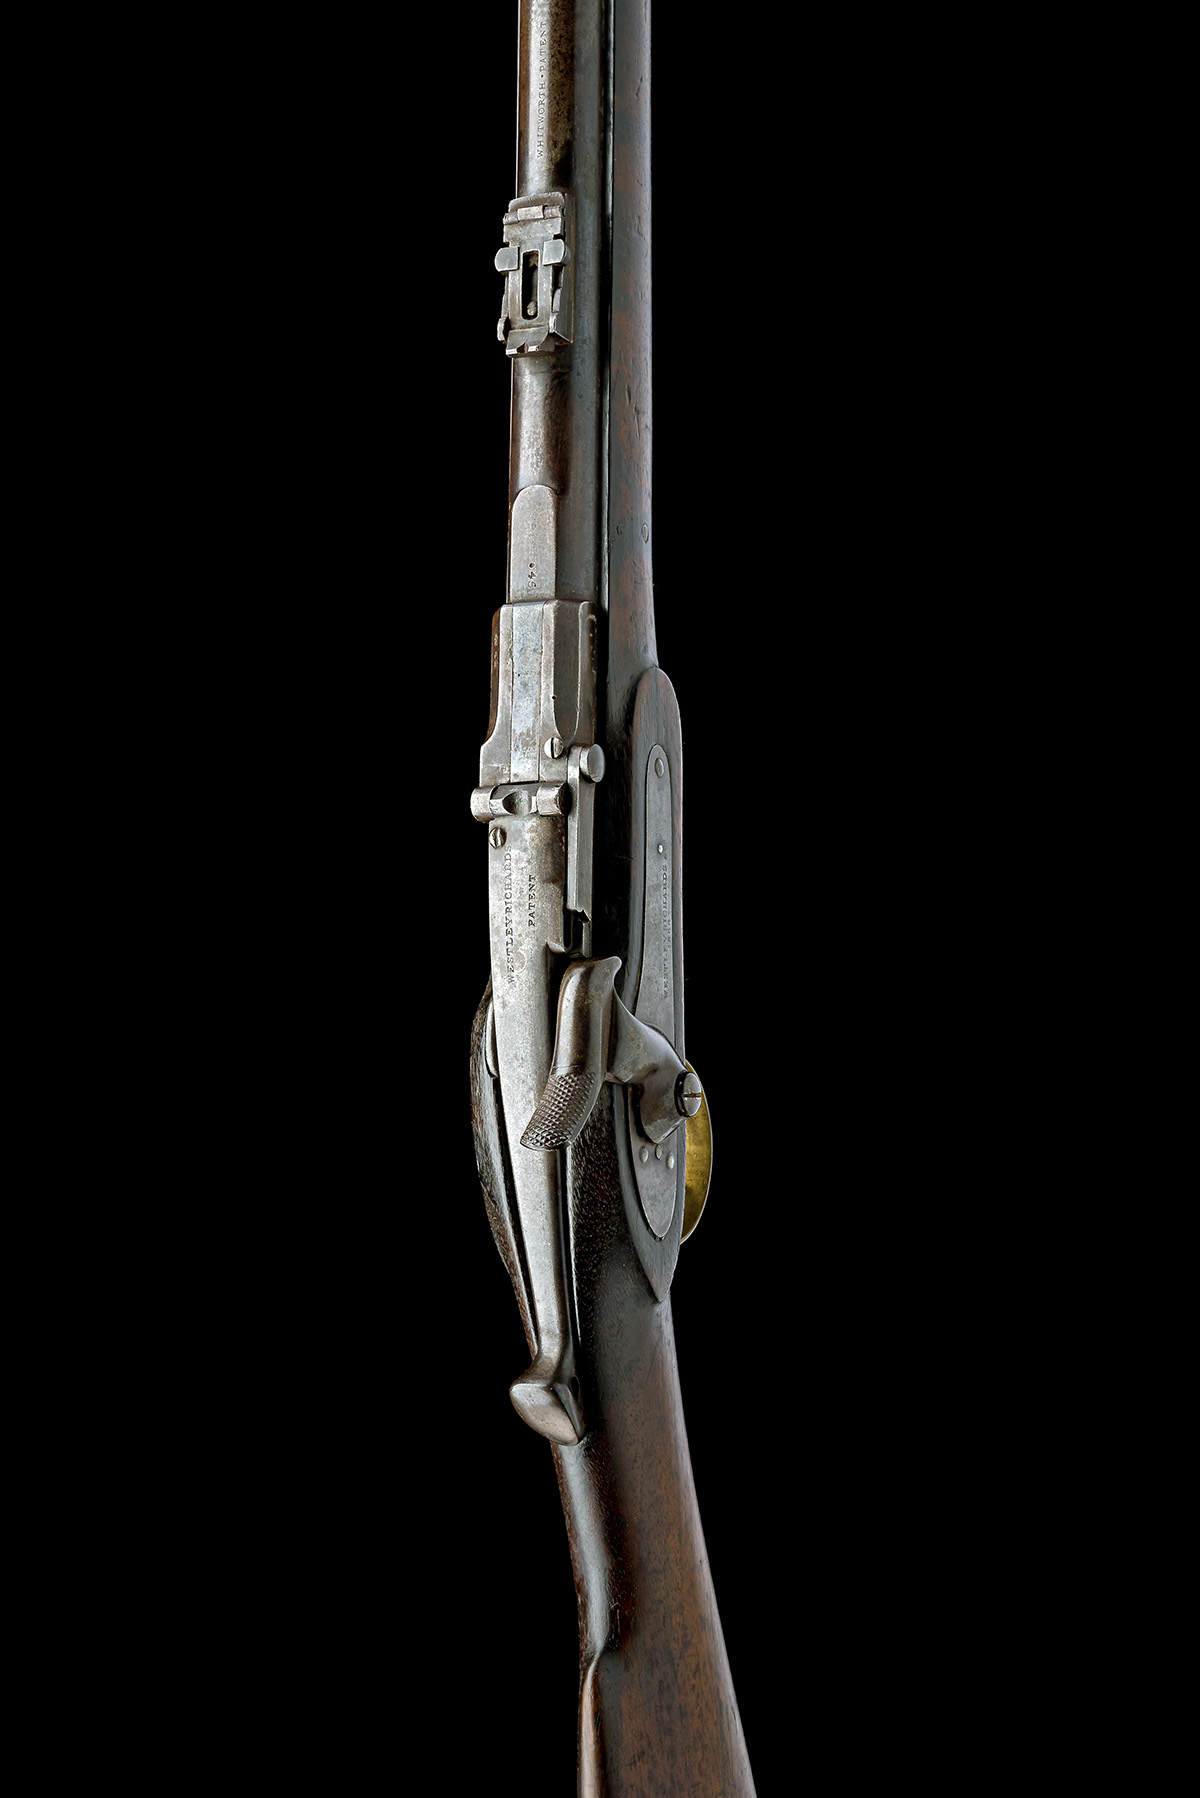 AN EXTREMELY RARE .450 CENTREFIRE 'COMBUSTIBLE CARTRIDGE' MONKEY TAIL CARBINE SIGNED WESTLEY - Image 4 of 10